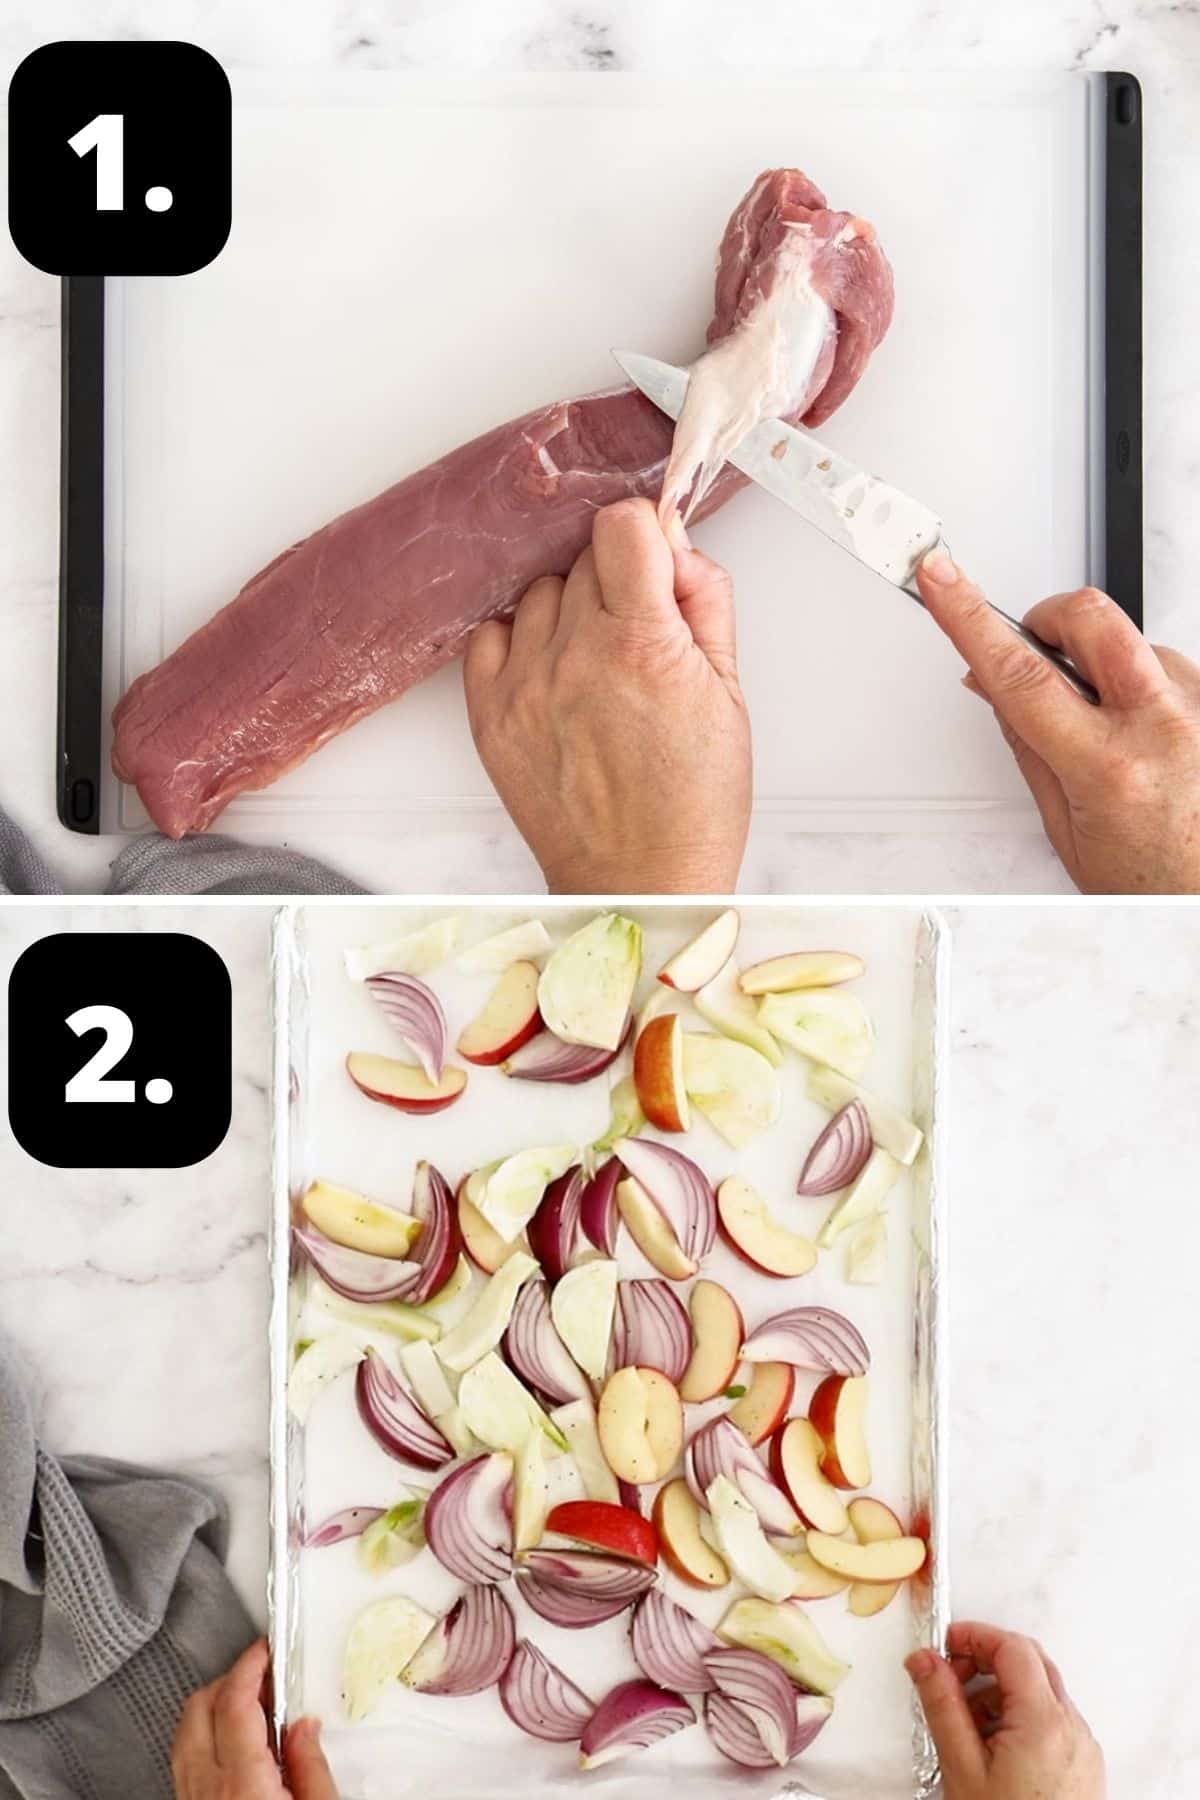 Steps 1-2 of preparing this recipe: removing silver skin from the pork and placing the vegetables on a sheet pan.